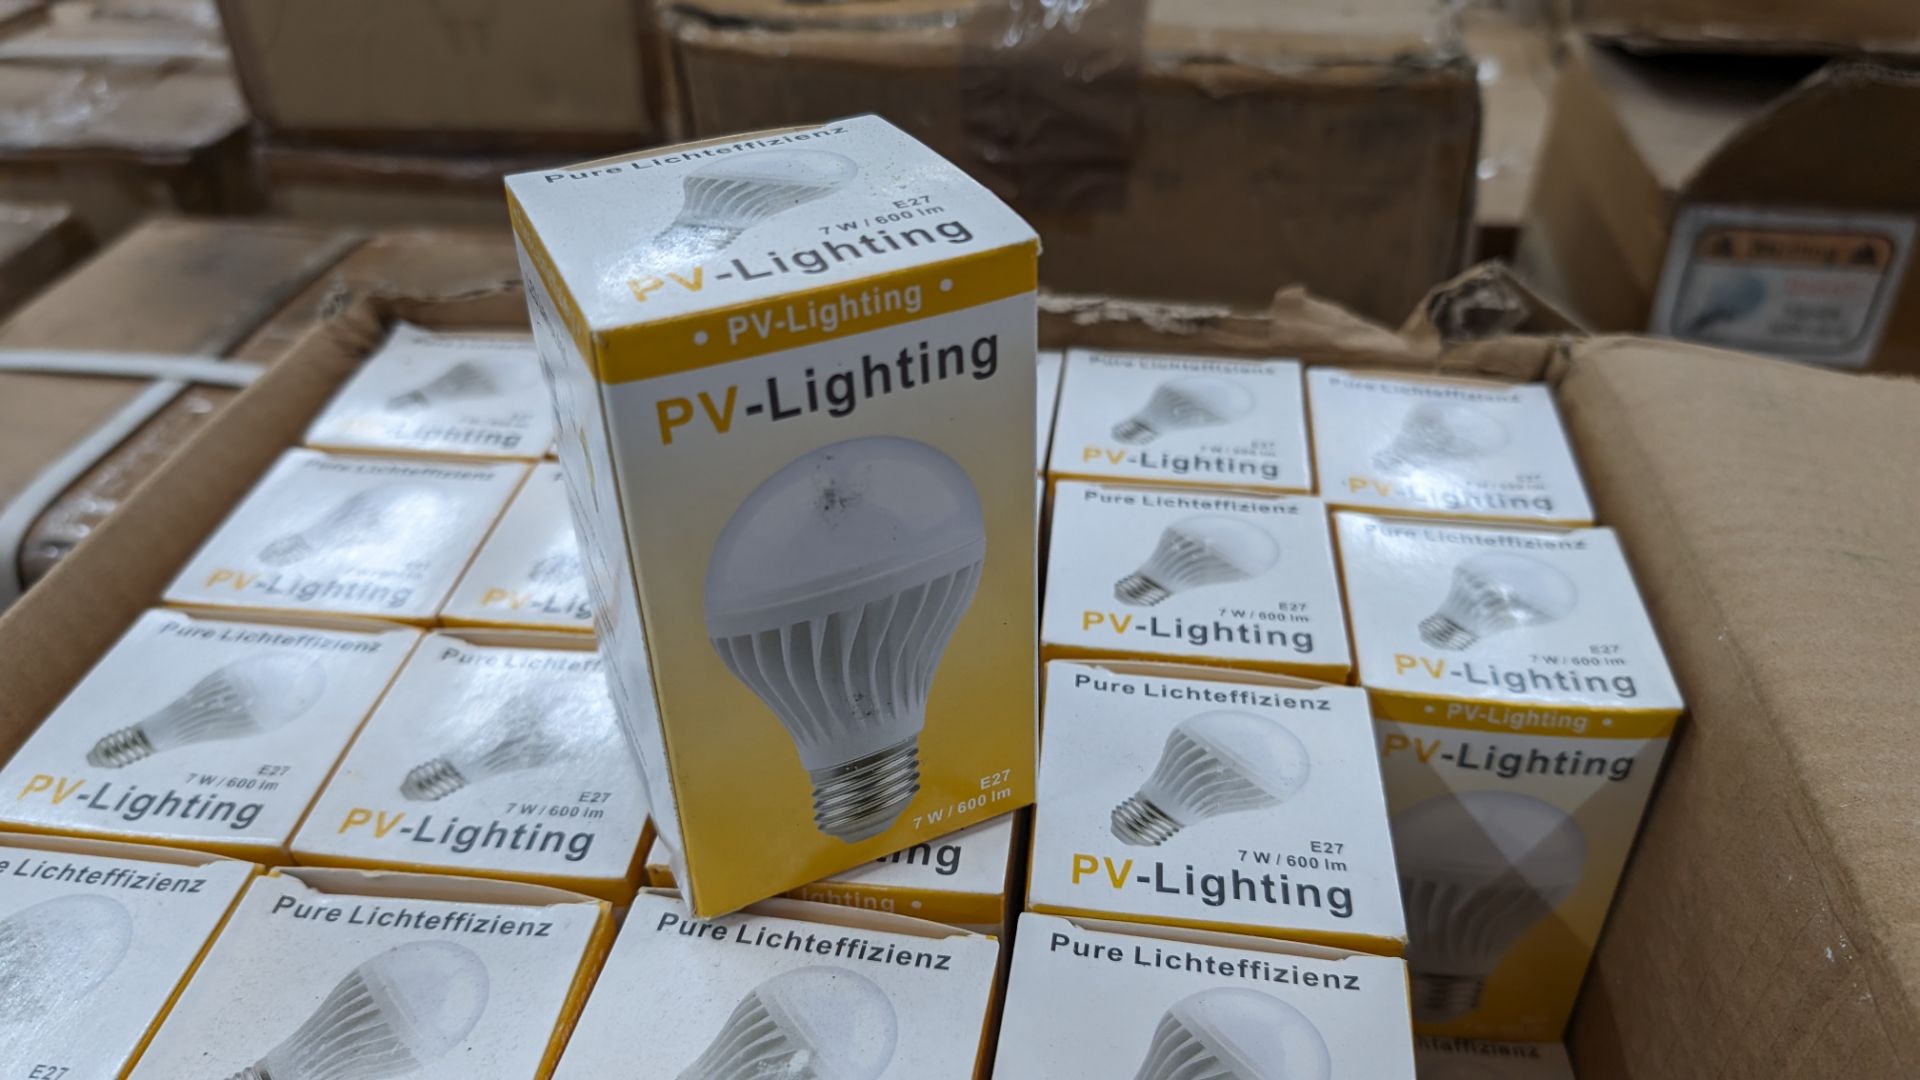 Approximately 97 A60 LED bulbs, 7w, 600 lumens, 25000 hours, warm white - 1 carton - Image 4 of 4